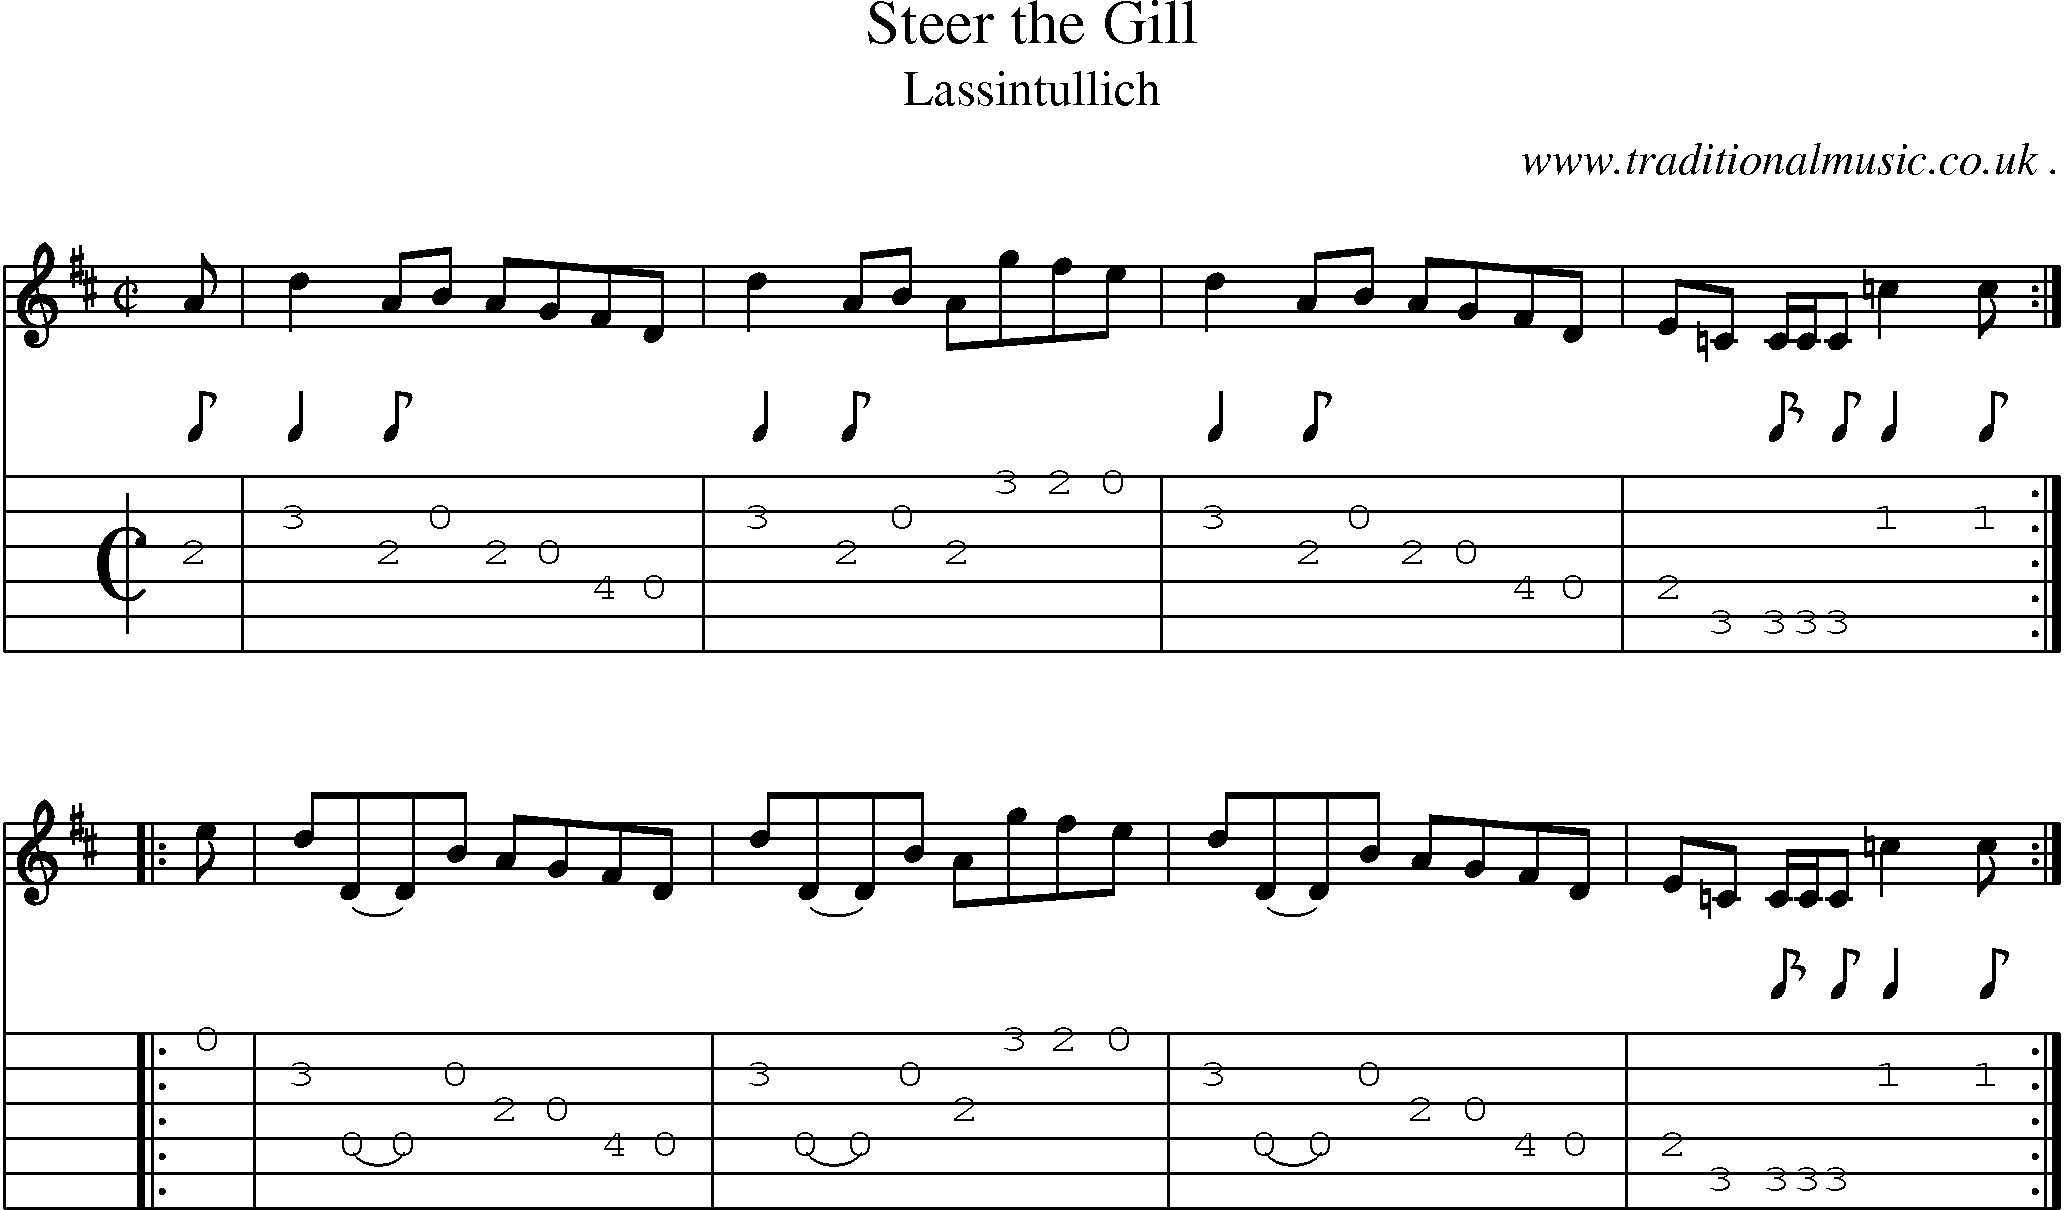 Sheet-music  score, Chords and Guitar Tabs for Steer The Gill